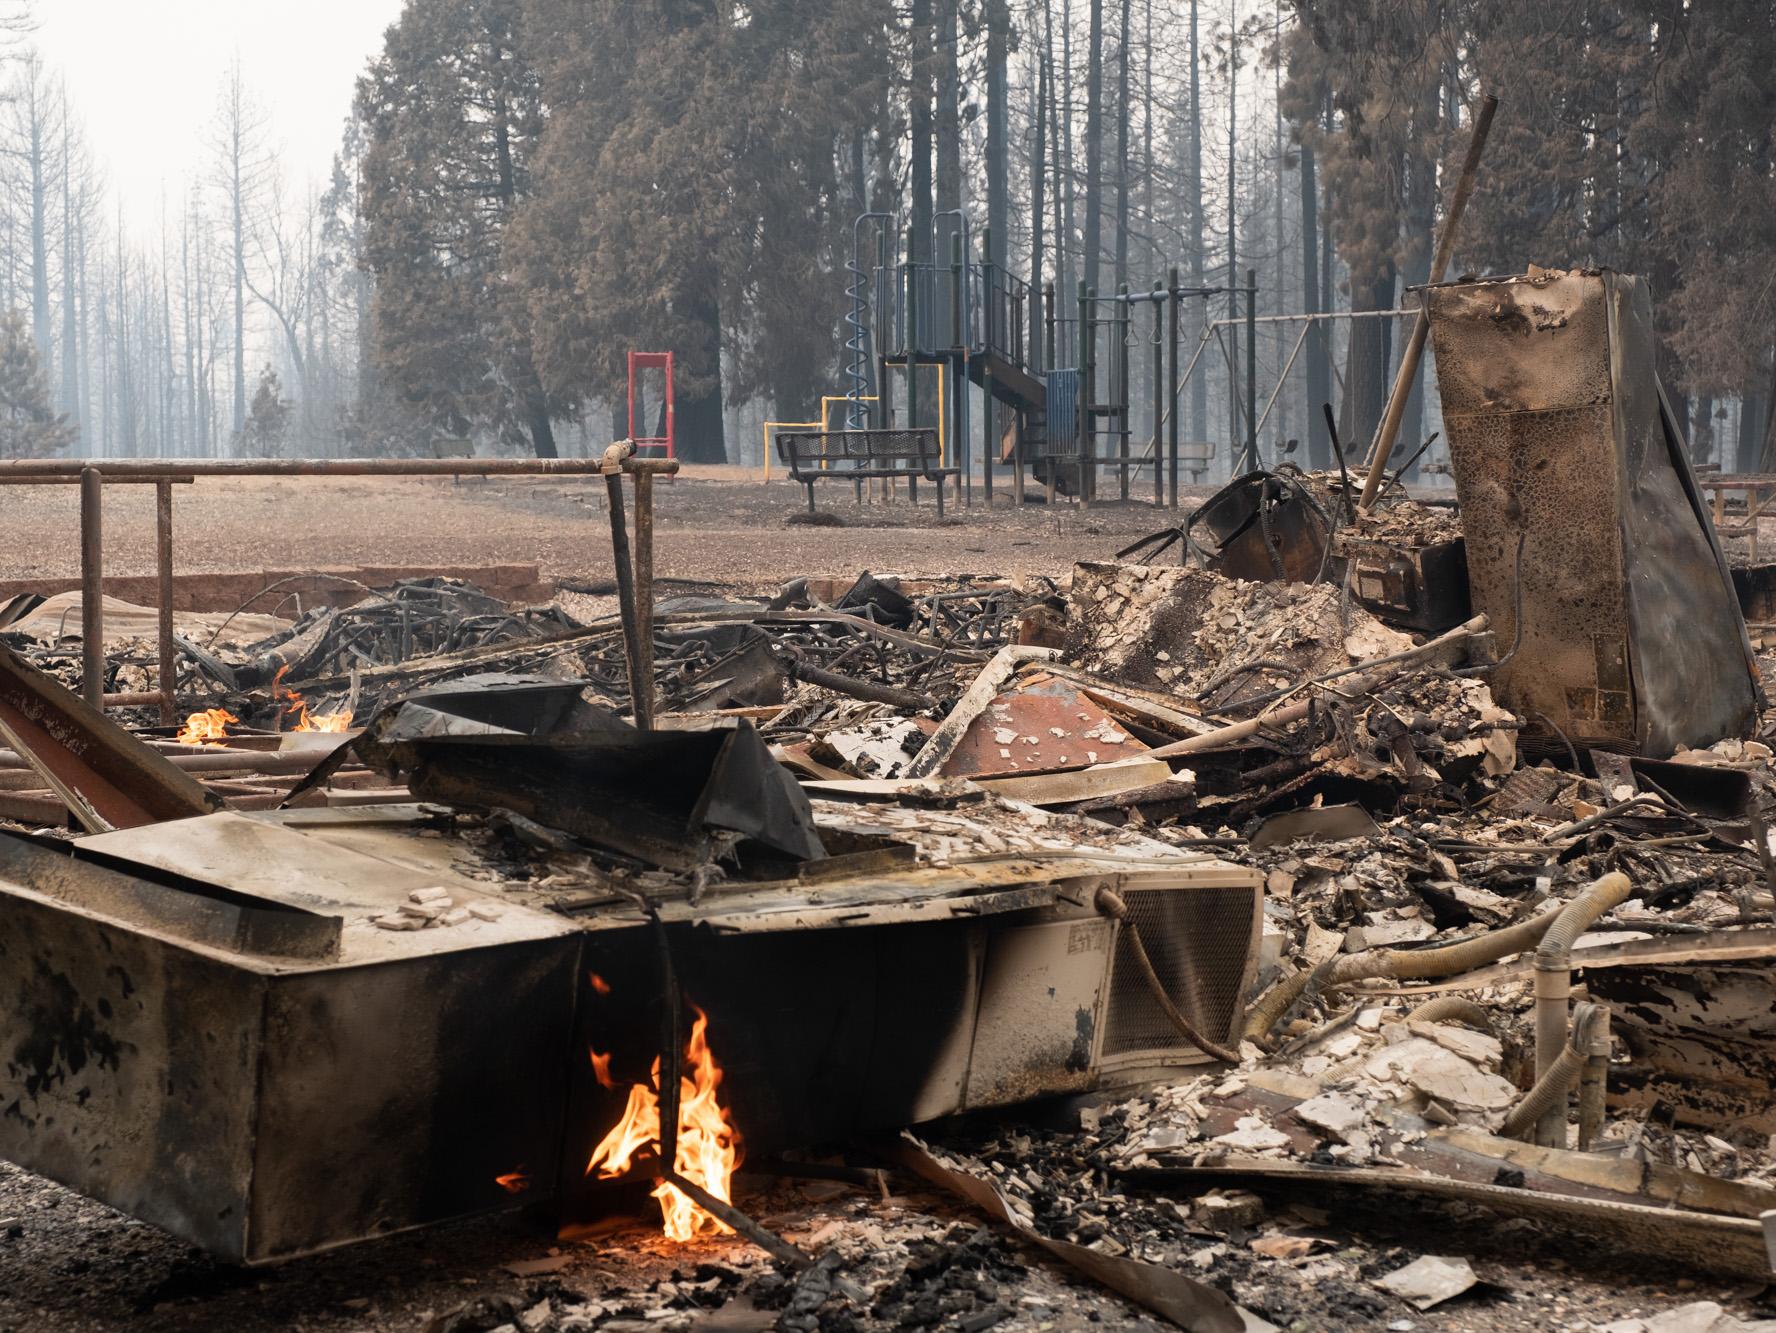 BURNED As California wildfires threaten rural communities, Forest Service prevention efforts stall